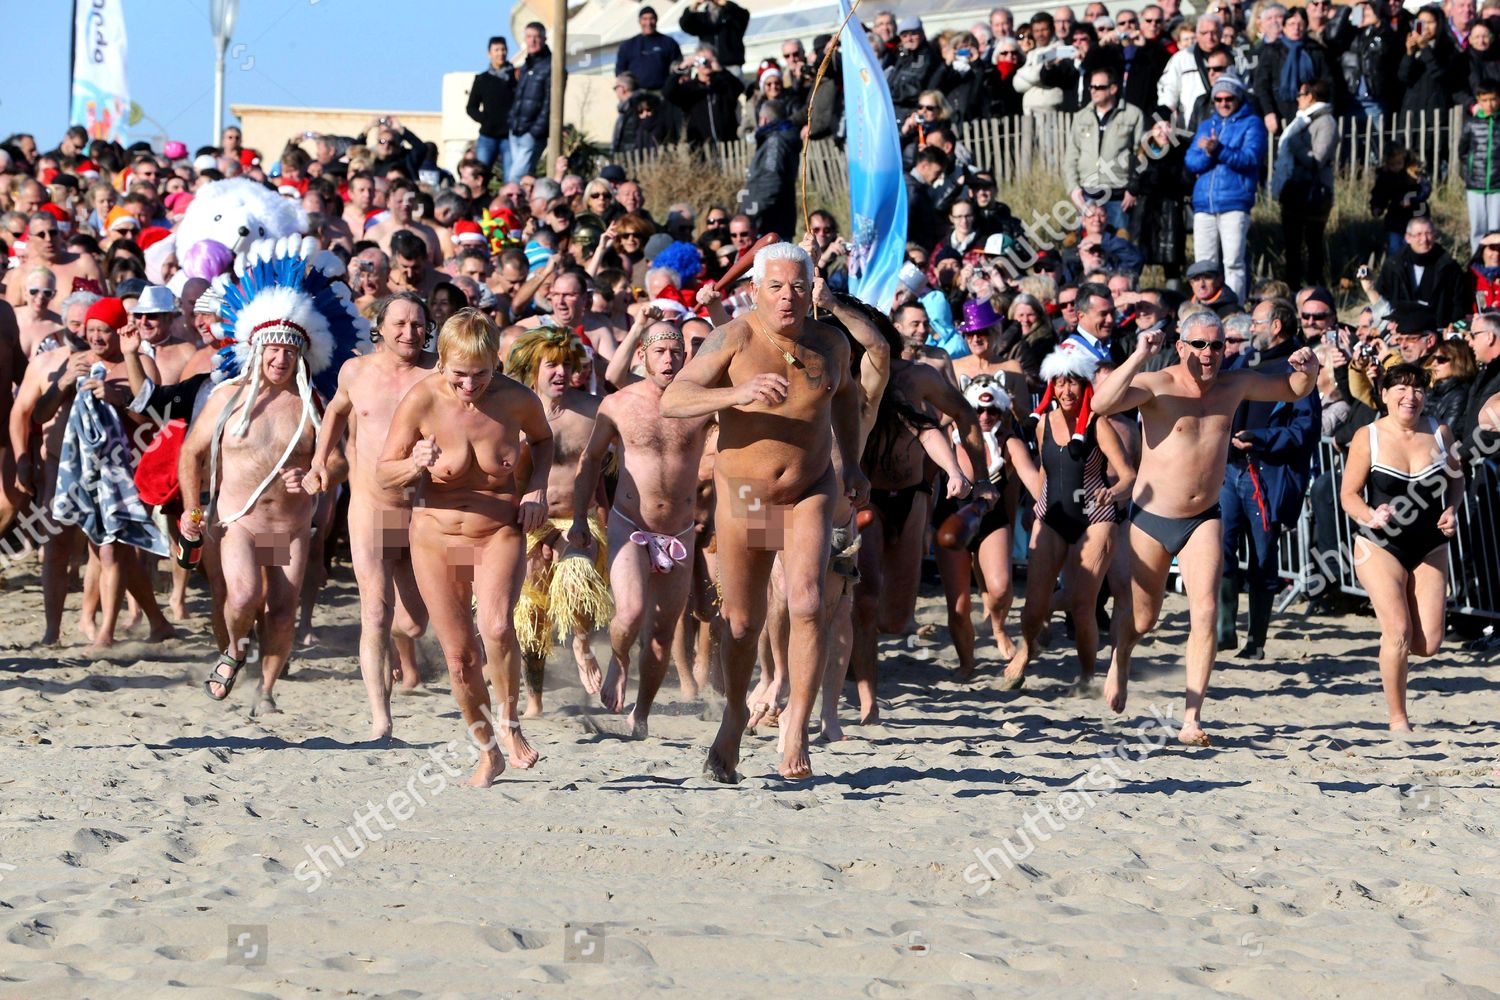 nudists-and-naturists-take-a-last-swim-of-the-year-cap-dagde-france-shutterstock-editorial-4345973a.jpg